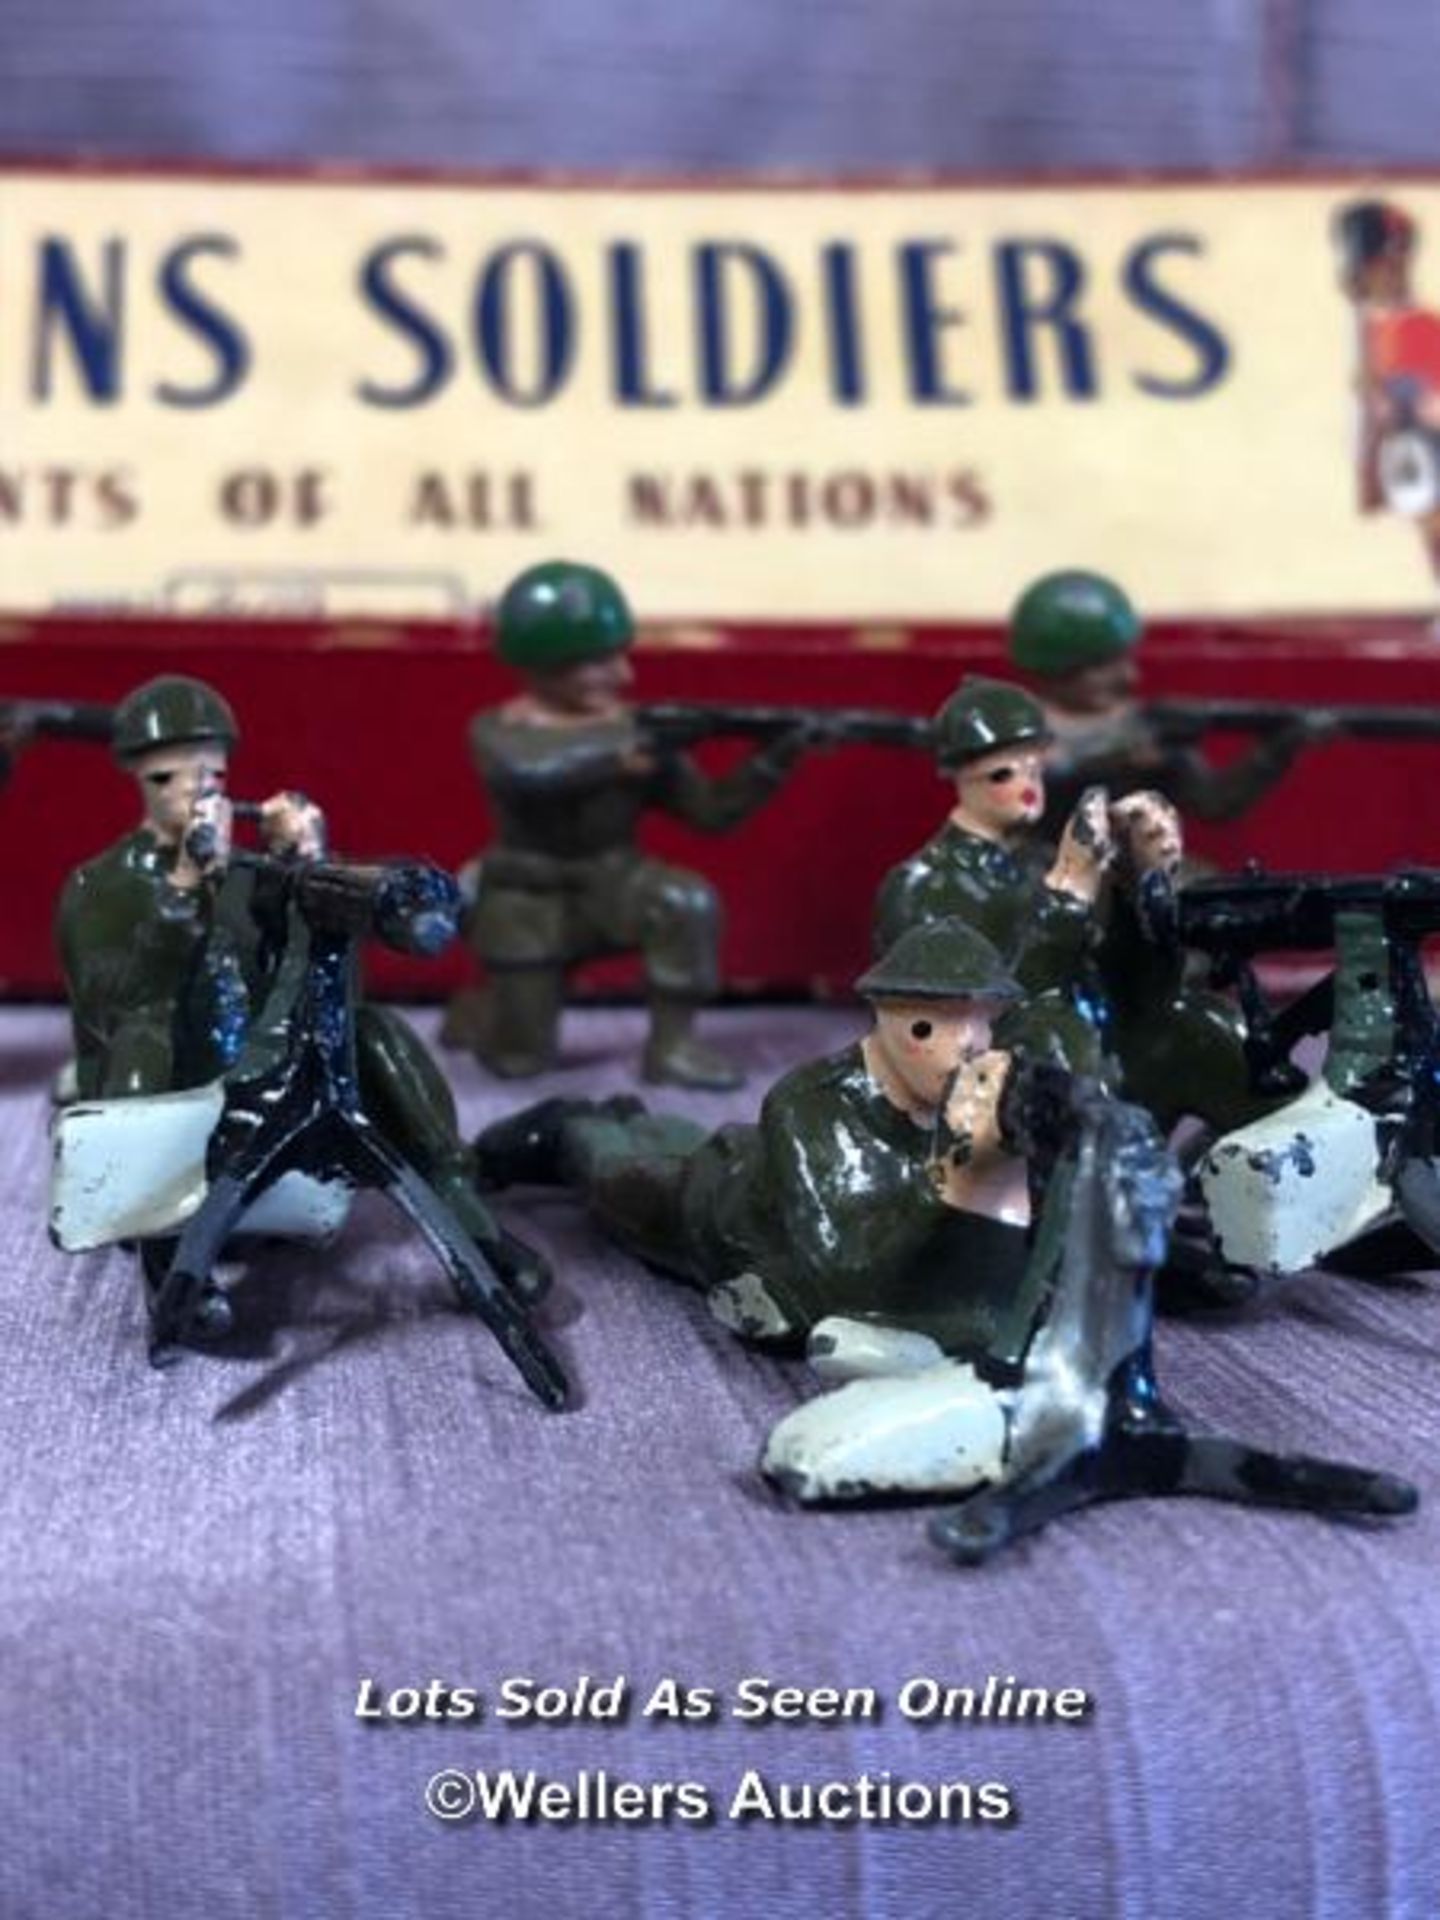 BRITAINS SOLDIERS REGIMENTS OF ALL NATIONS, WITH A NON MATCHING BOX NO. 2063 THE ARGYLL AND - Image 4 of 6